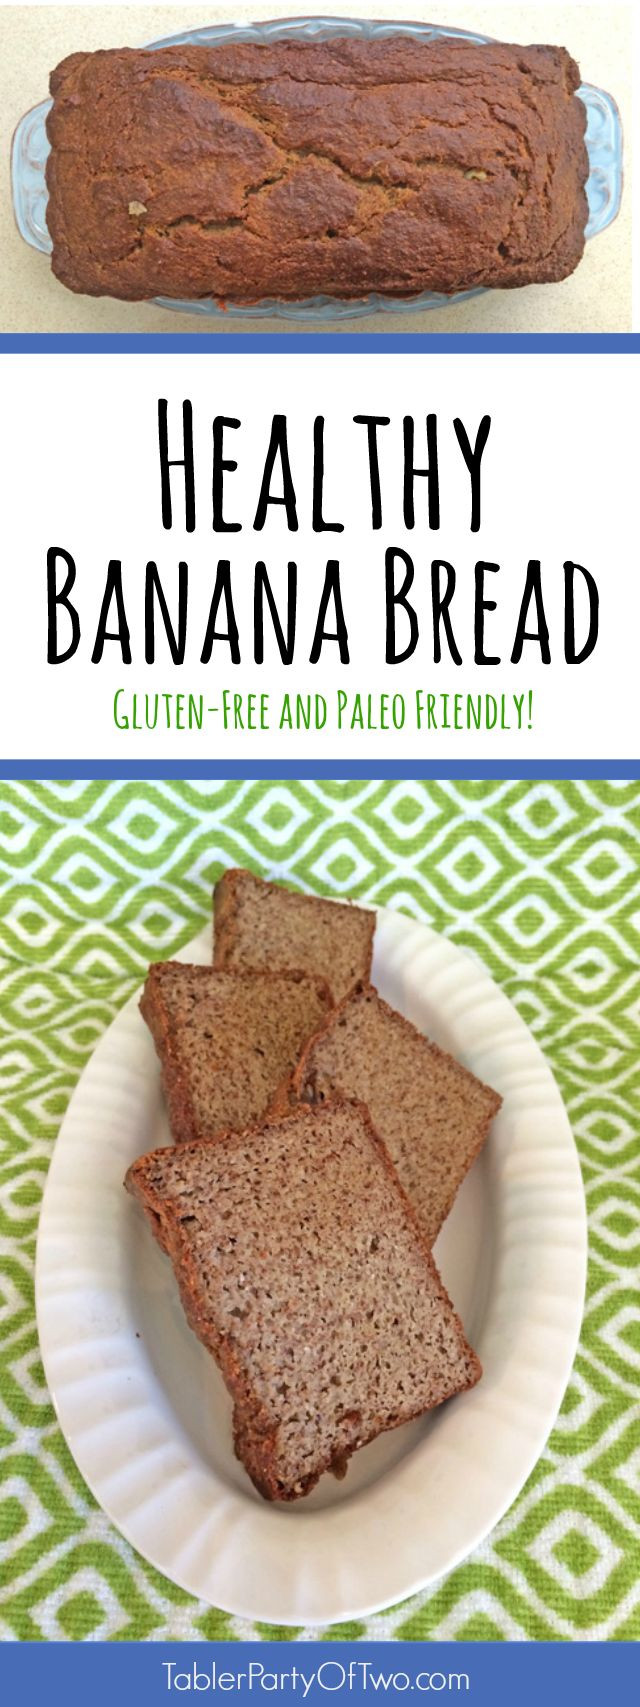 Healthy Gluten Free Banana Bread
 best Eating Healthy images on Pinterest